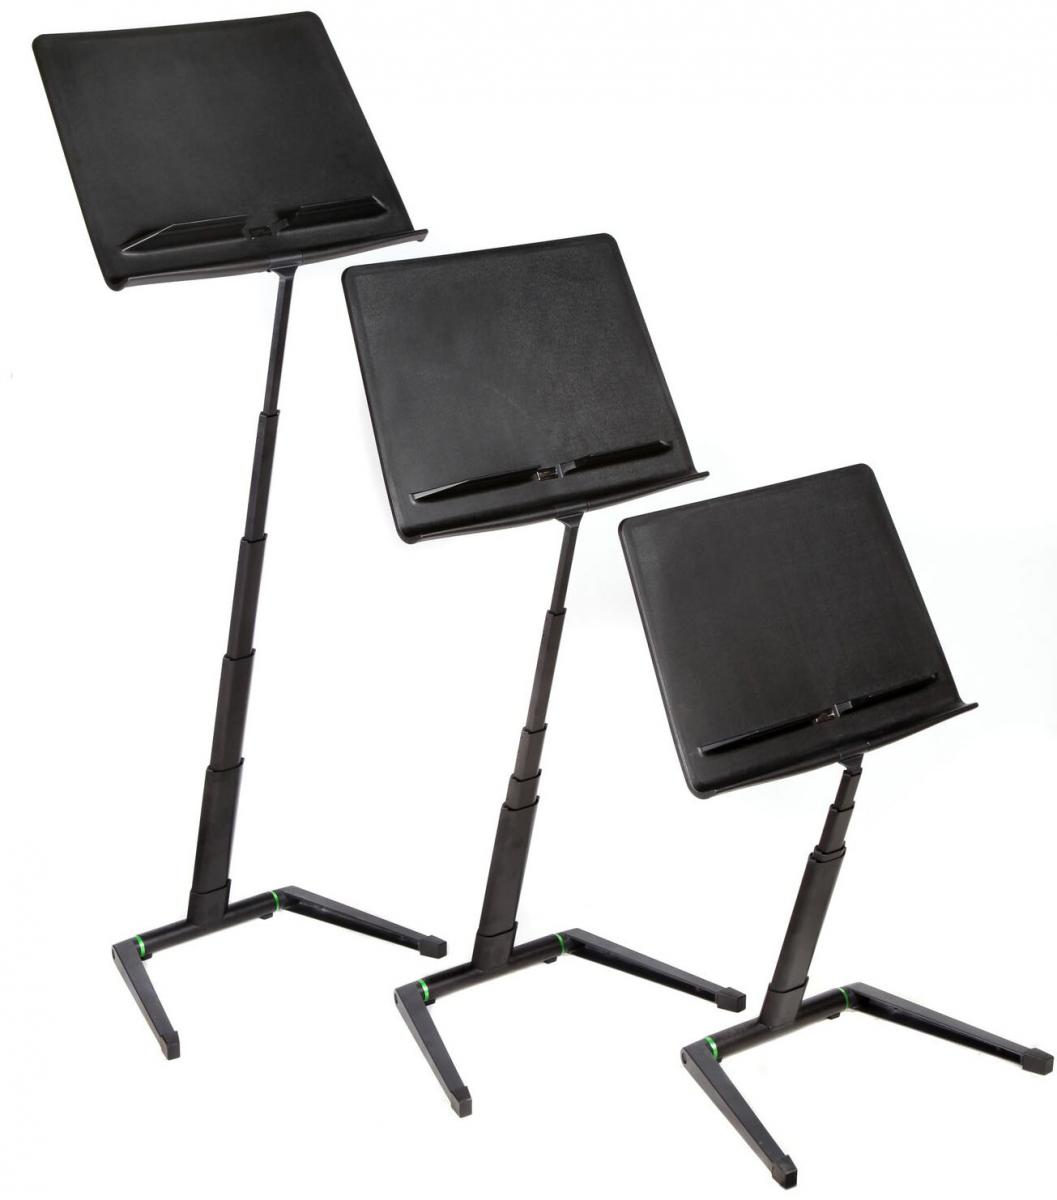 Voyager music stand